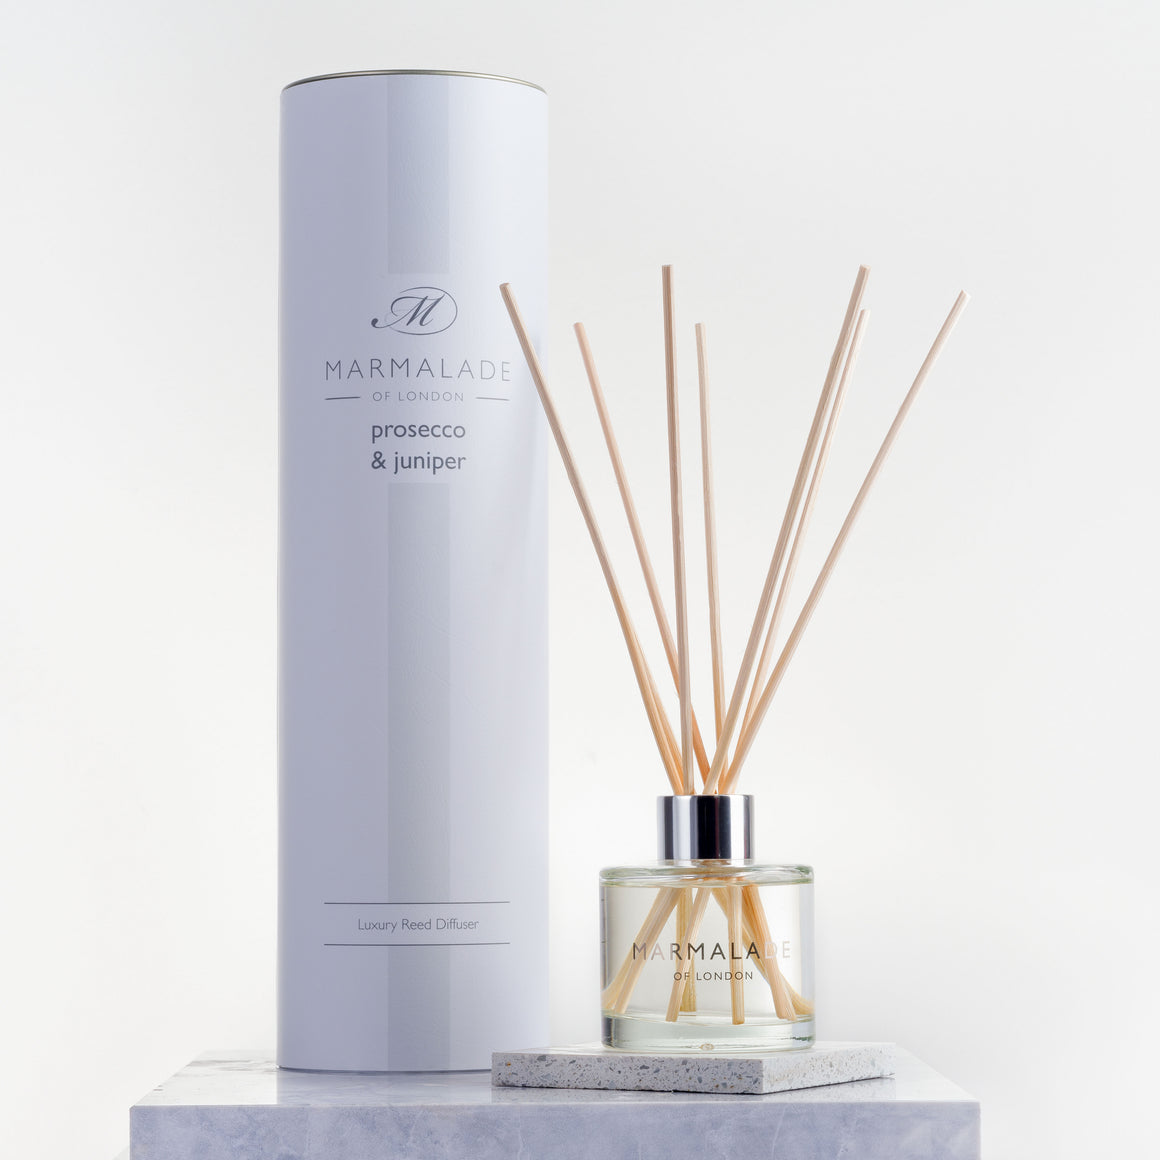 Marmalade of London Prosecco & Juniper Reed Diffuser with white packaging